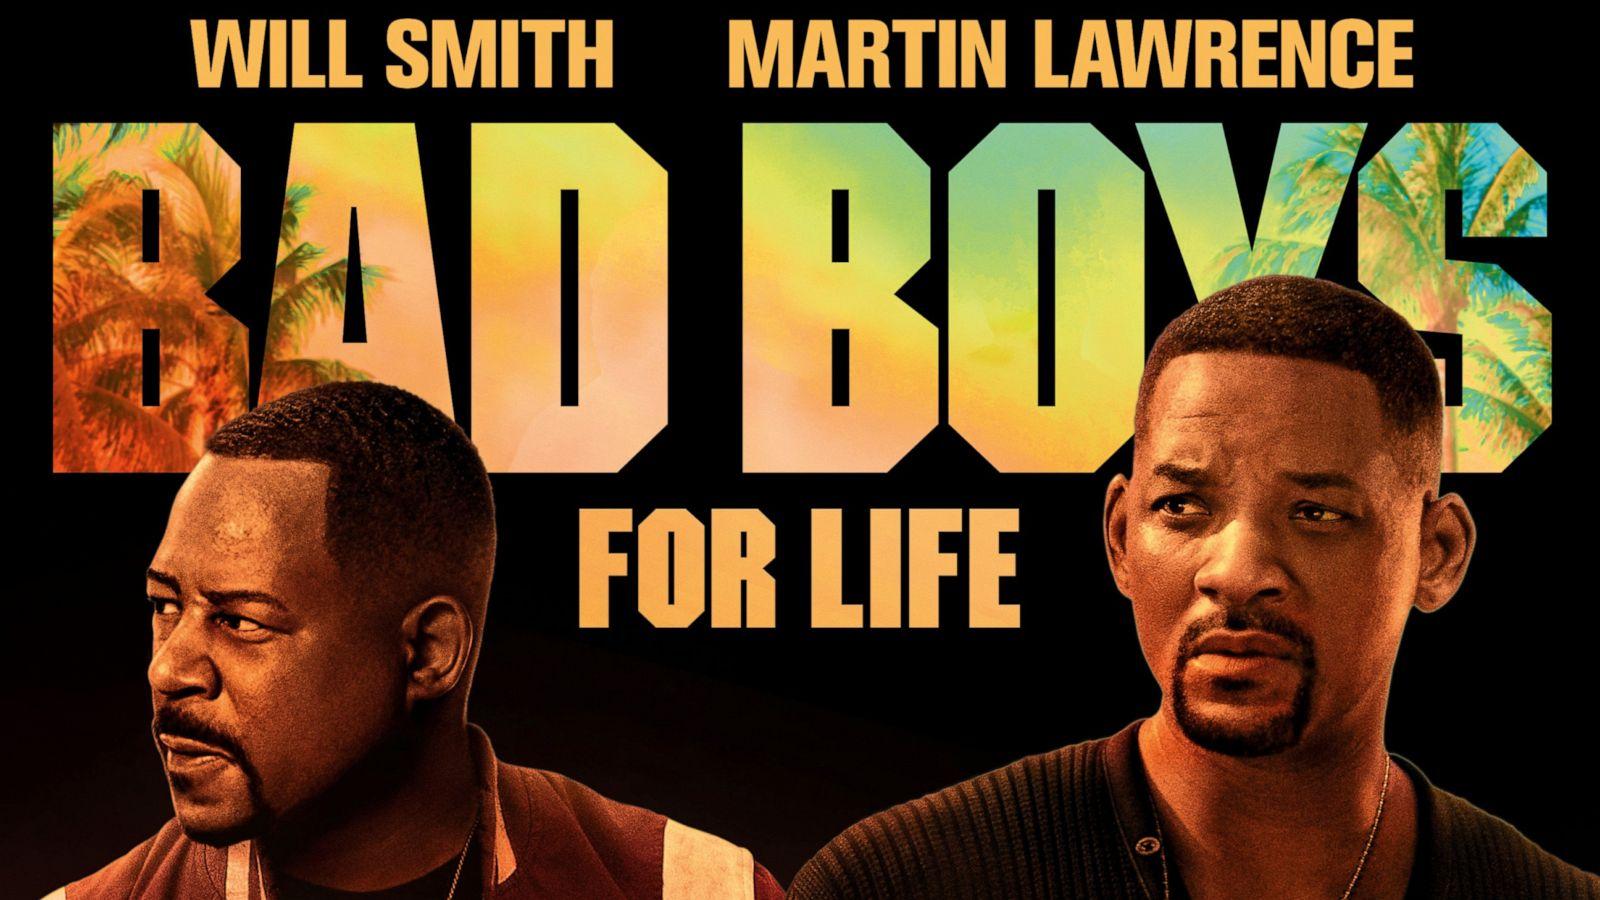 Like Miami, 'Bad Boys for Life' soundtrack is hot and fun